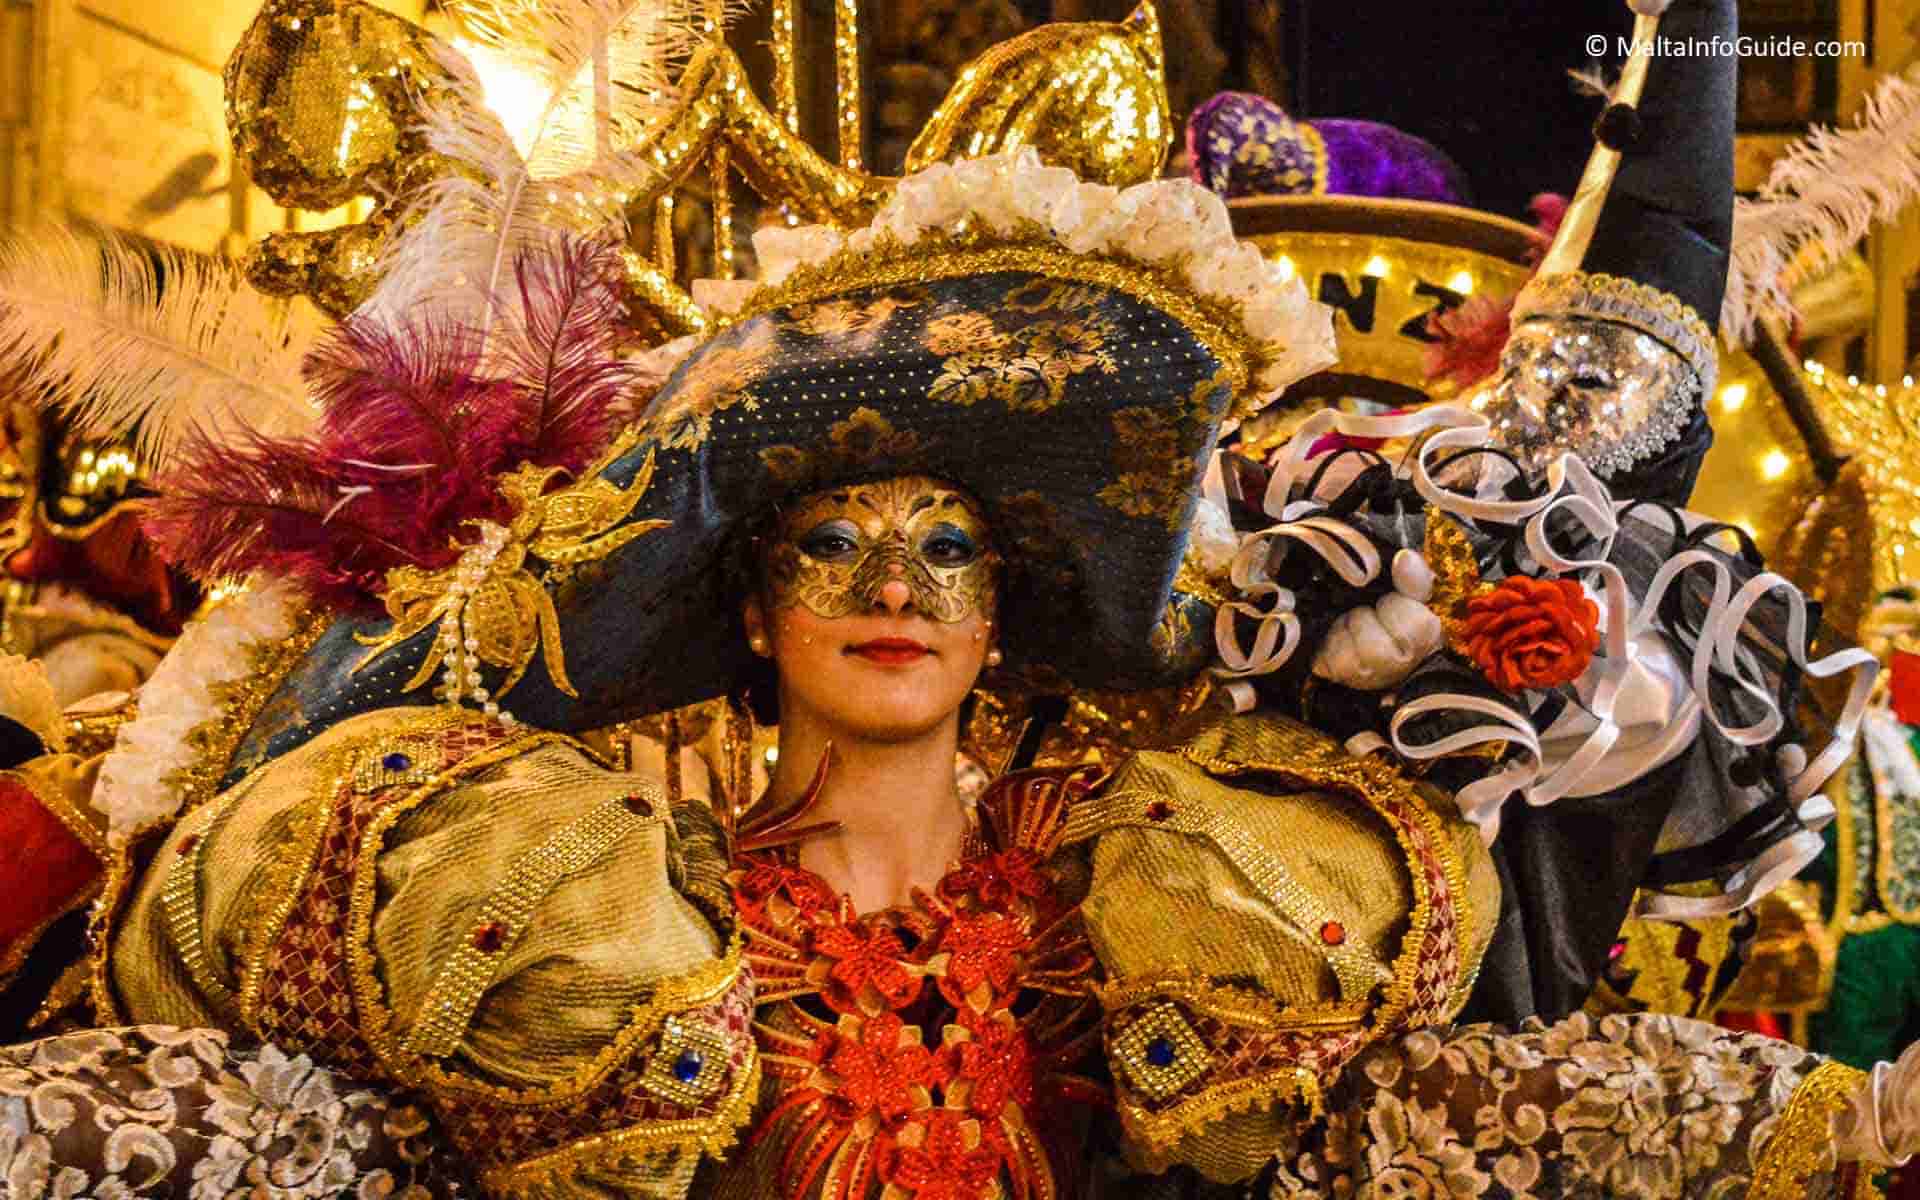 A lady dressed up in a gold and orange costume during Carnival in Malta